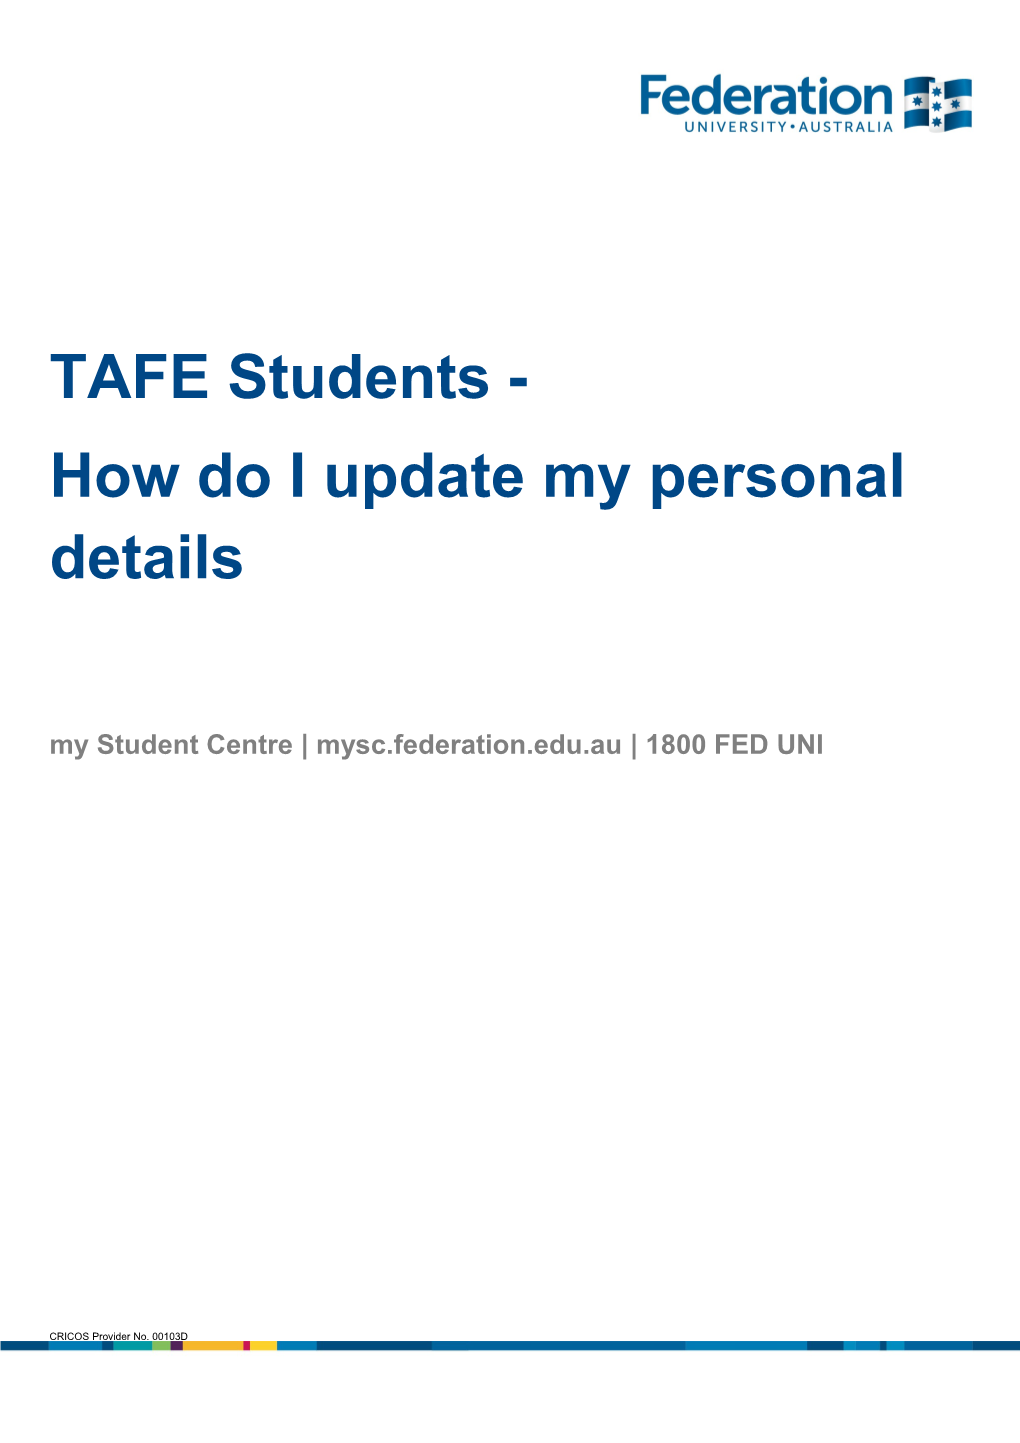 Guide to Complete the Enrolment Checklist for TAFE Students